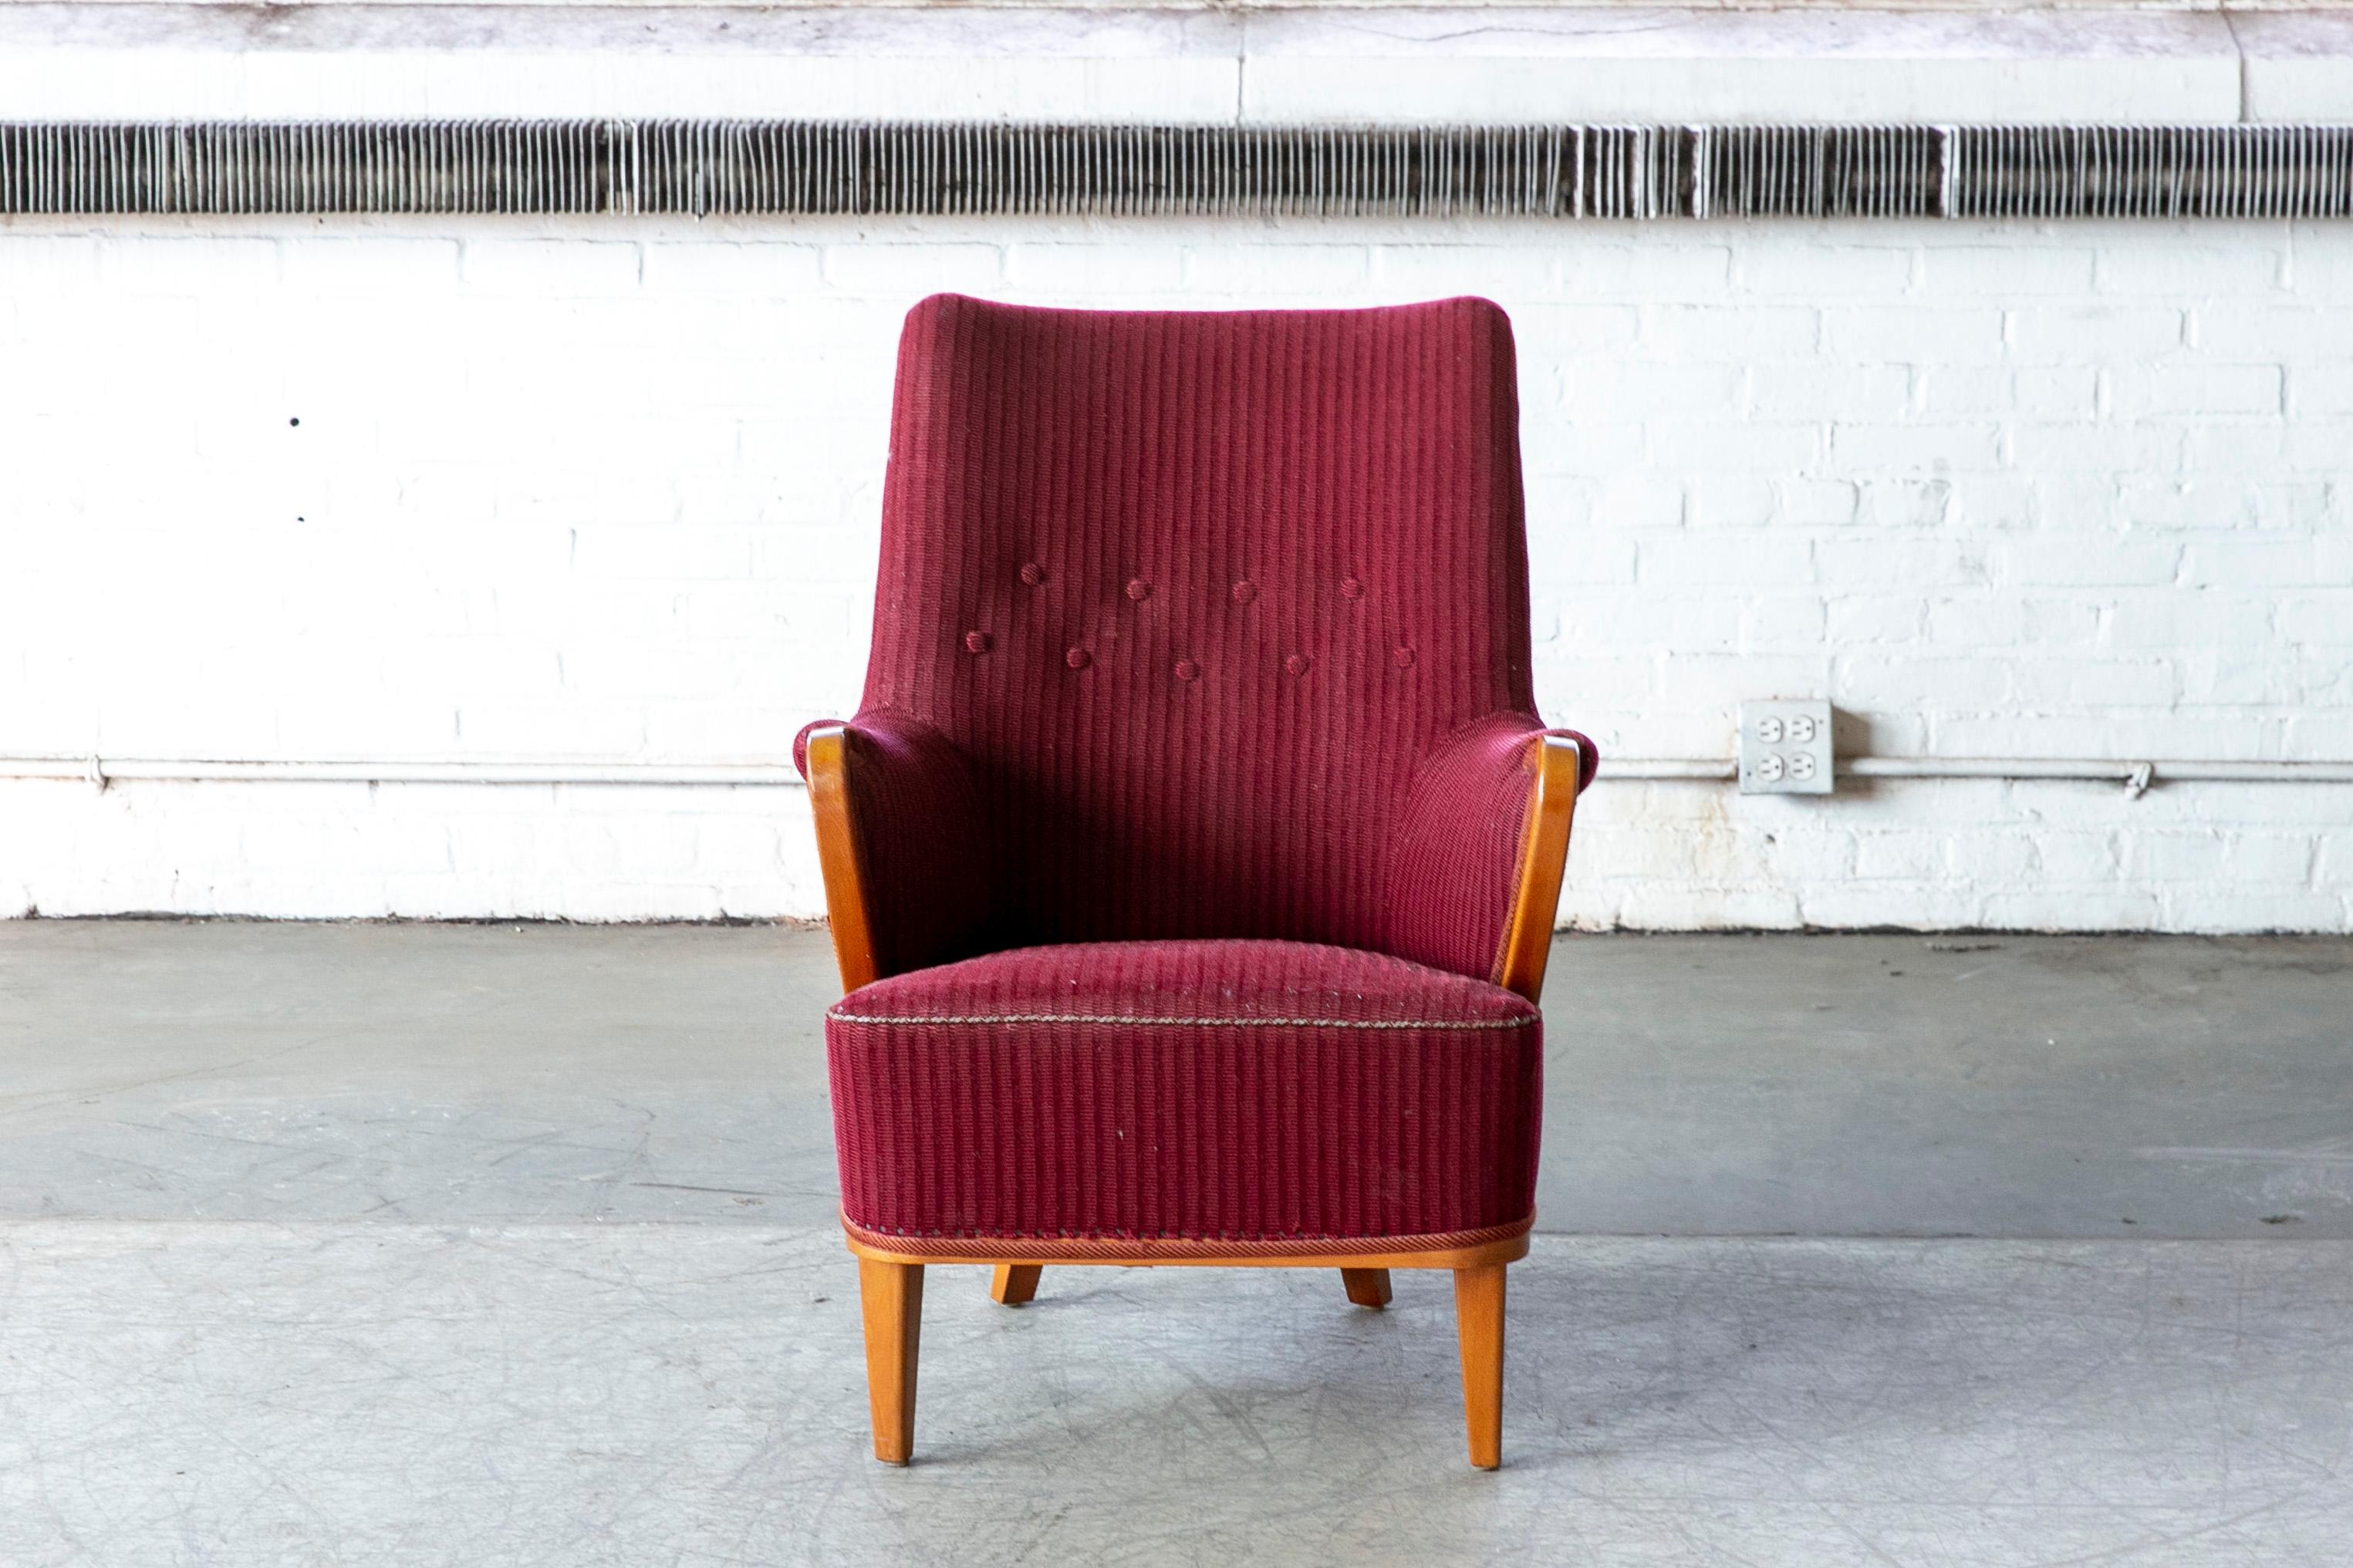 Mid-20th Century Swedish Lounge Chair by Axel Larsson for Hjalmar Jackson 1940's For Sale